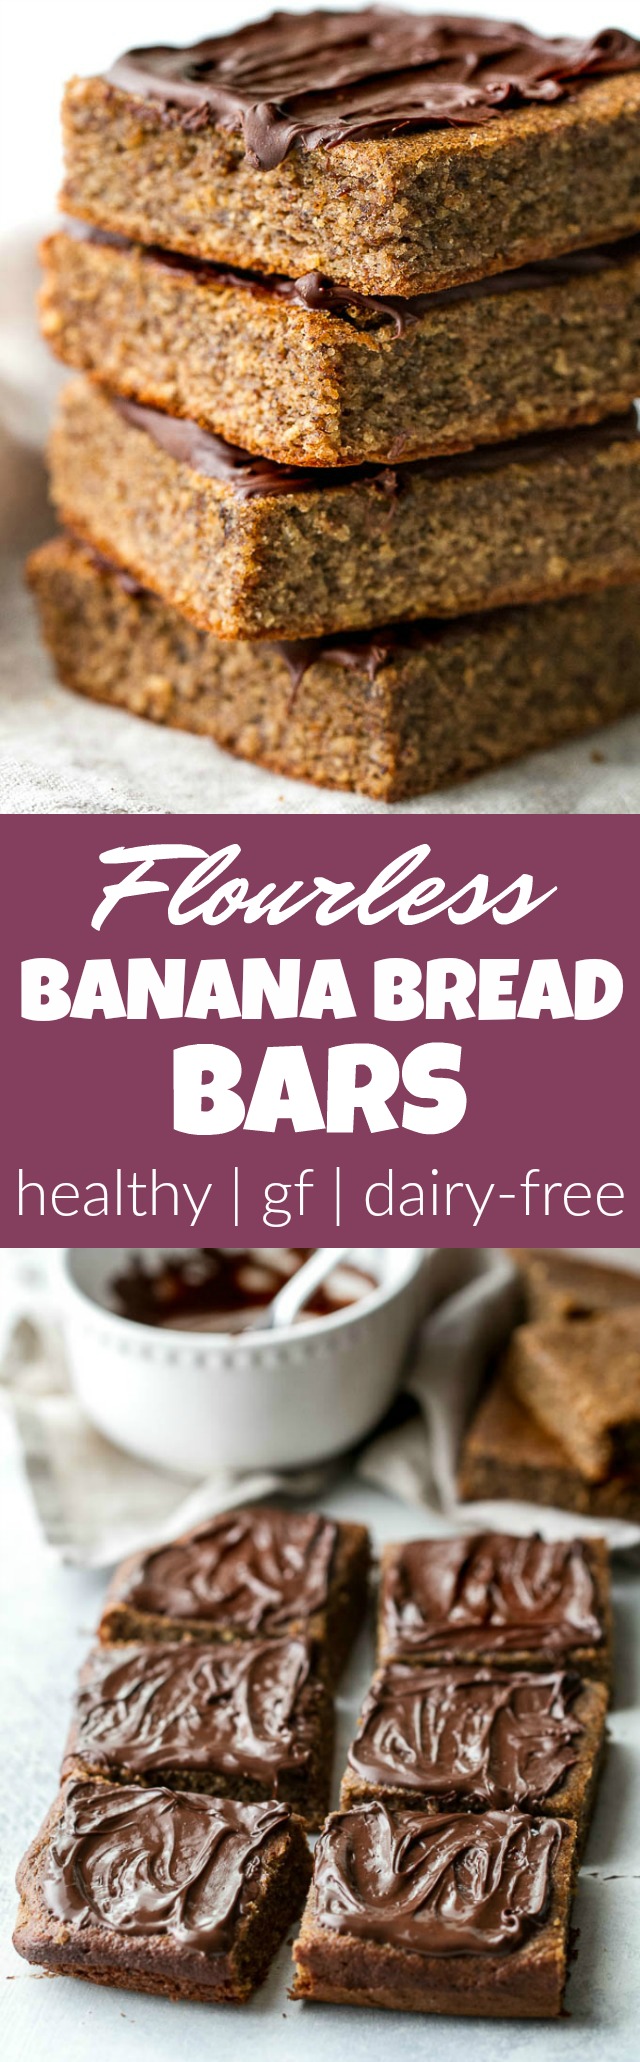 Flourless Banana Bread Bars made in the blender with only a handful of simple ingredients! They’re gluten-free, oil-free, dairy-free, and refined-sugar-free, so they make a deliciously healthy treat for when those cravings hit | runningwithspoons.com